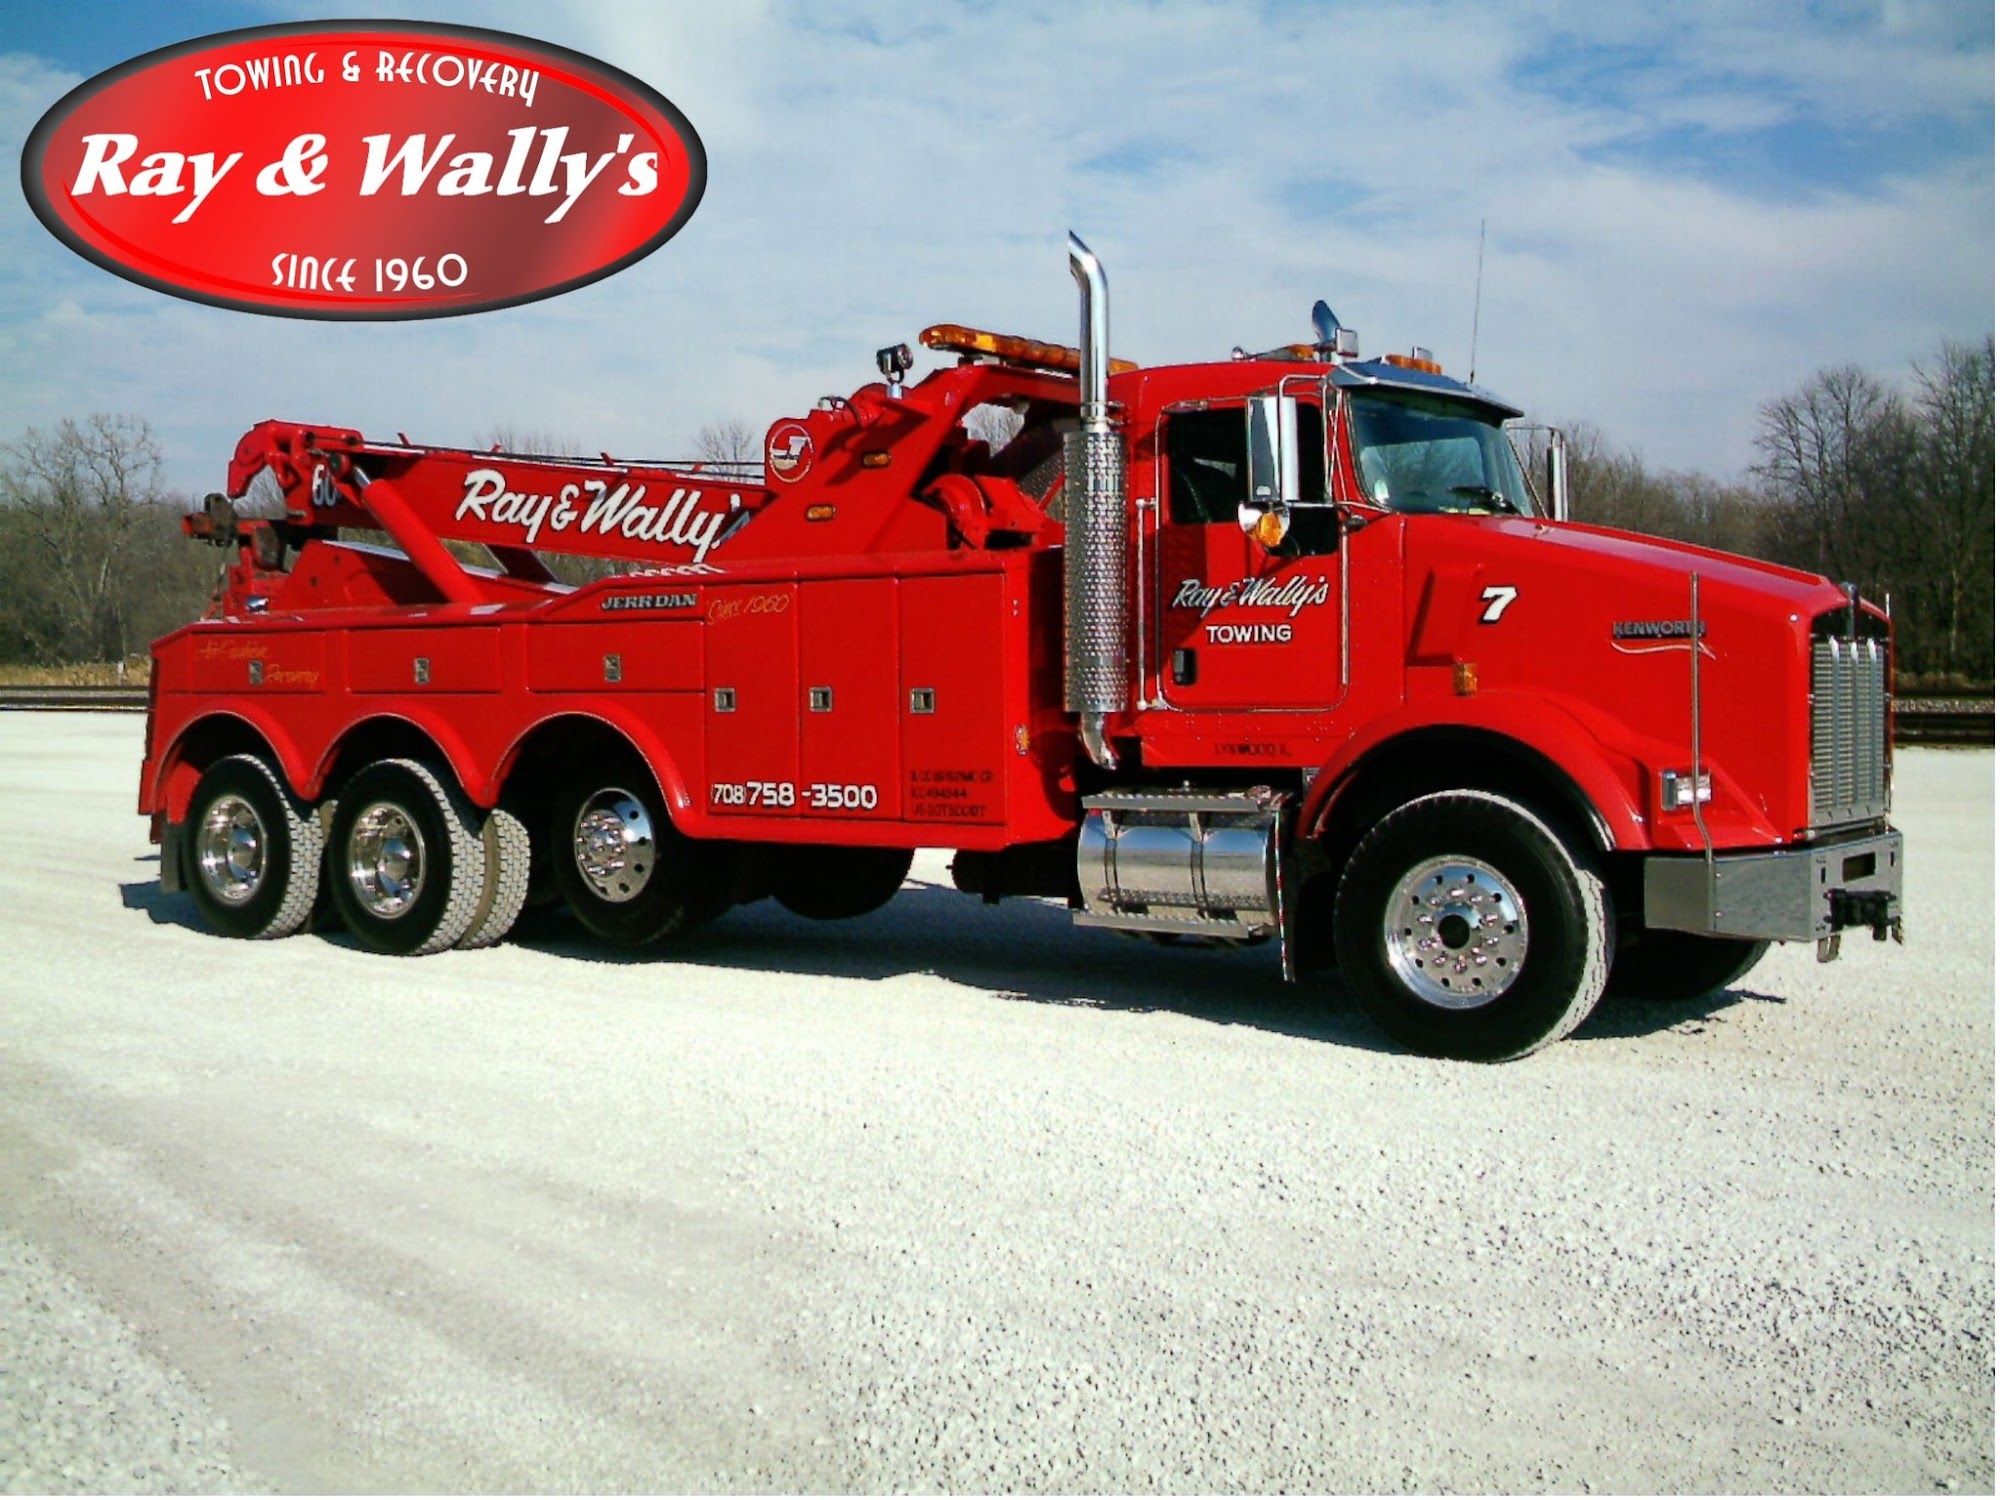 Ray & Wally's Towing Service, Inc.